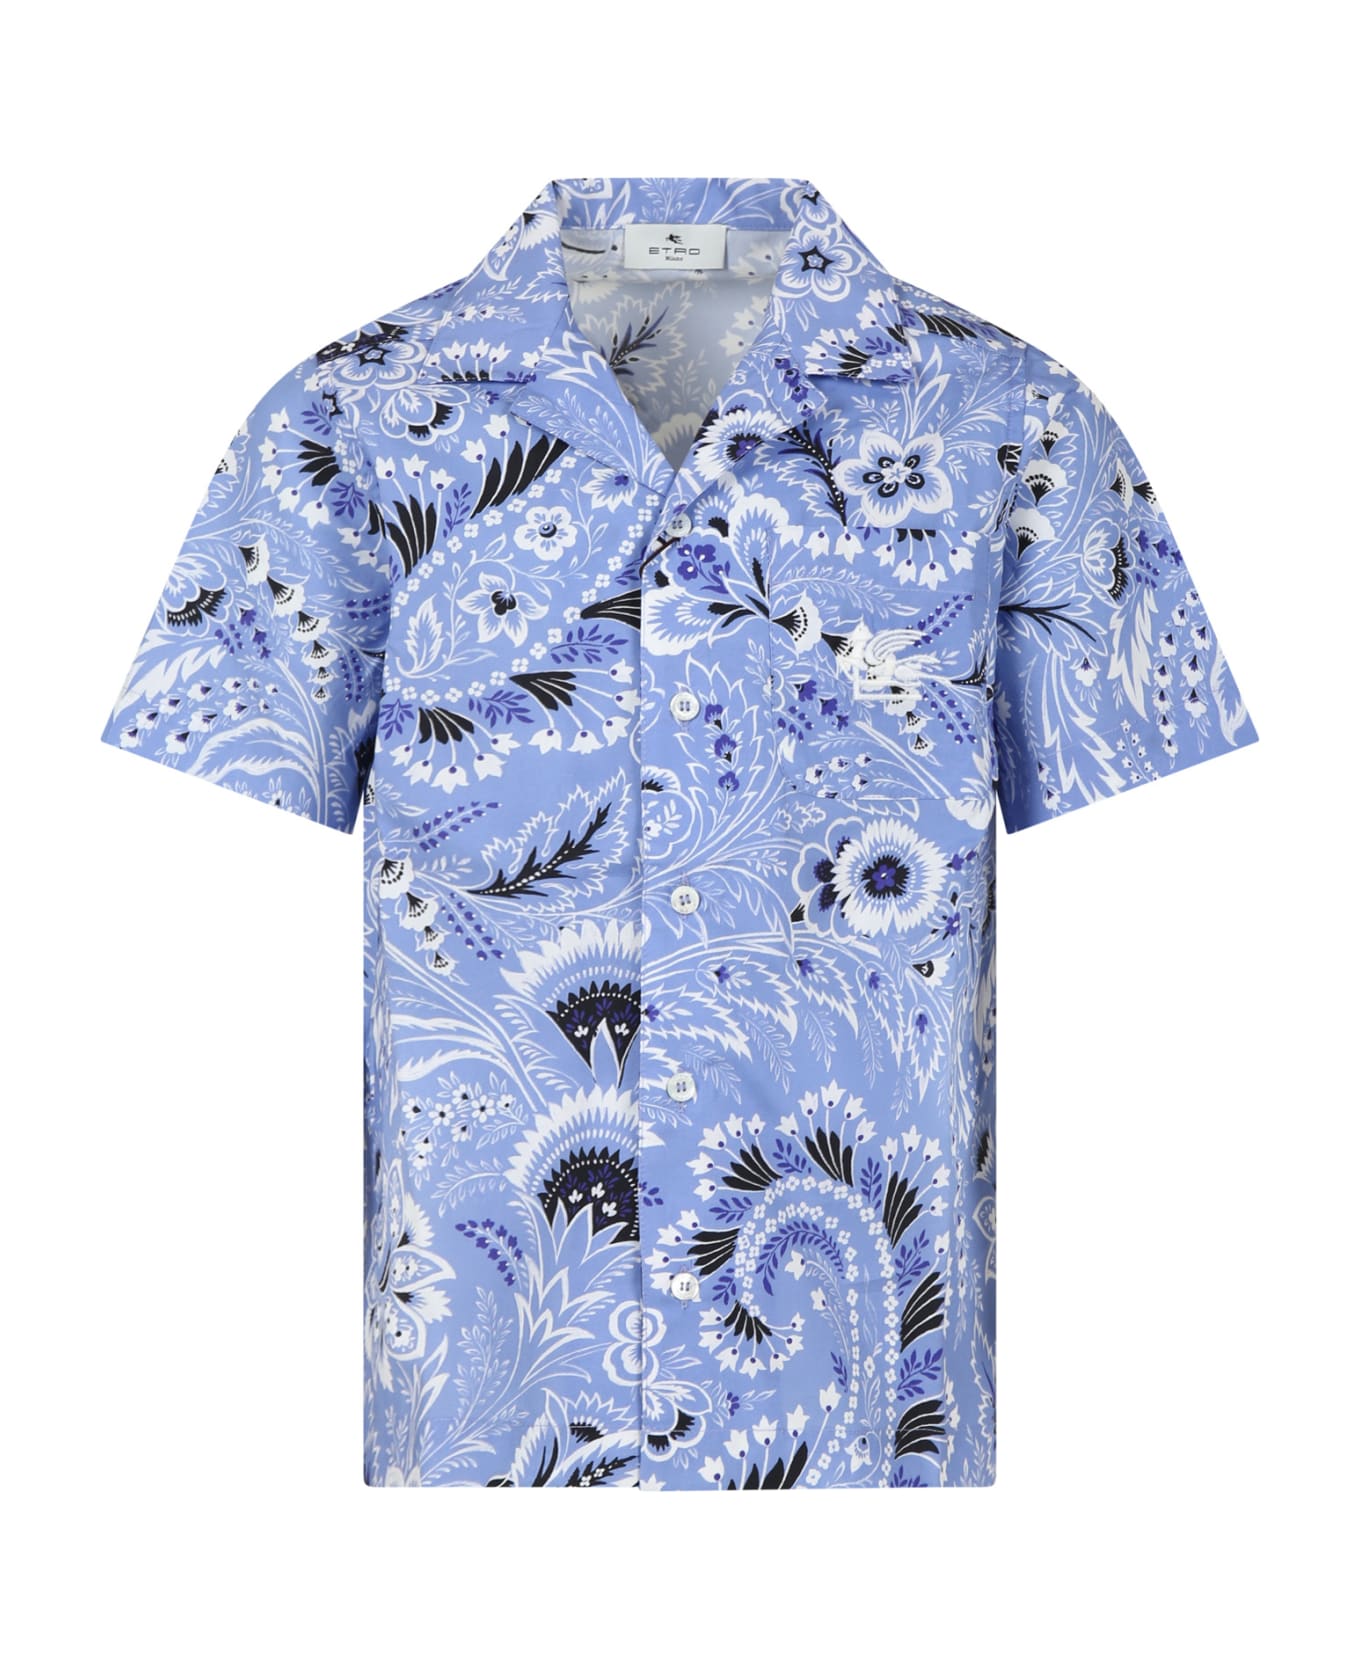 Etro Sky Blue Shirt For Boy With Paisley Pattern - Light Blue